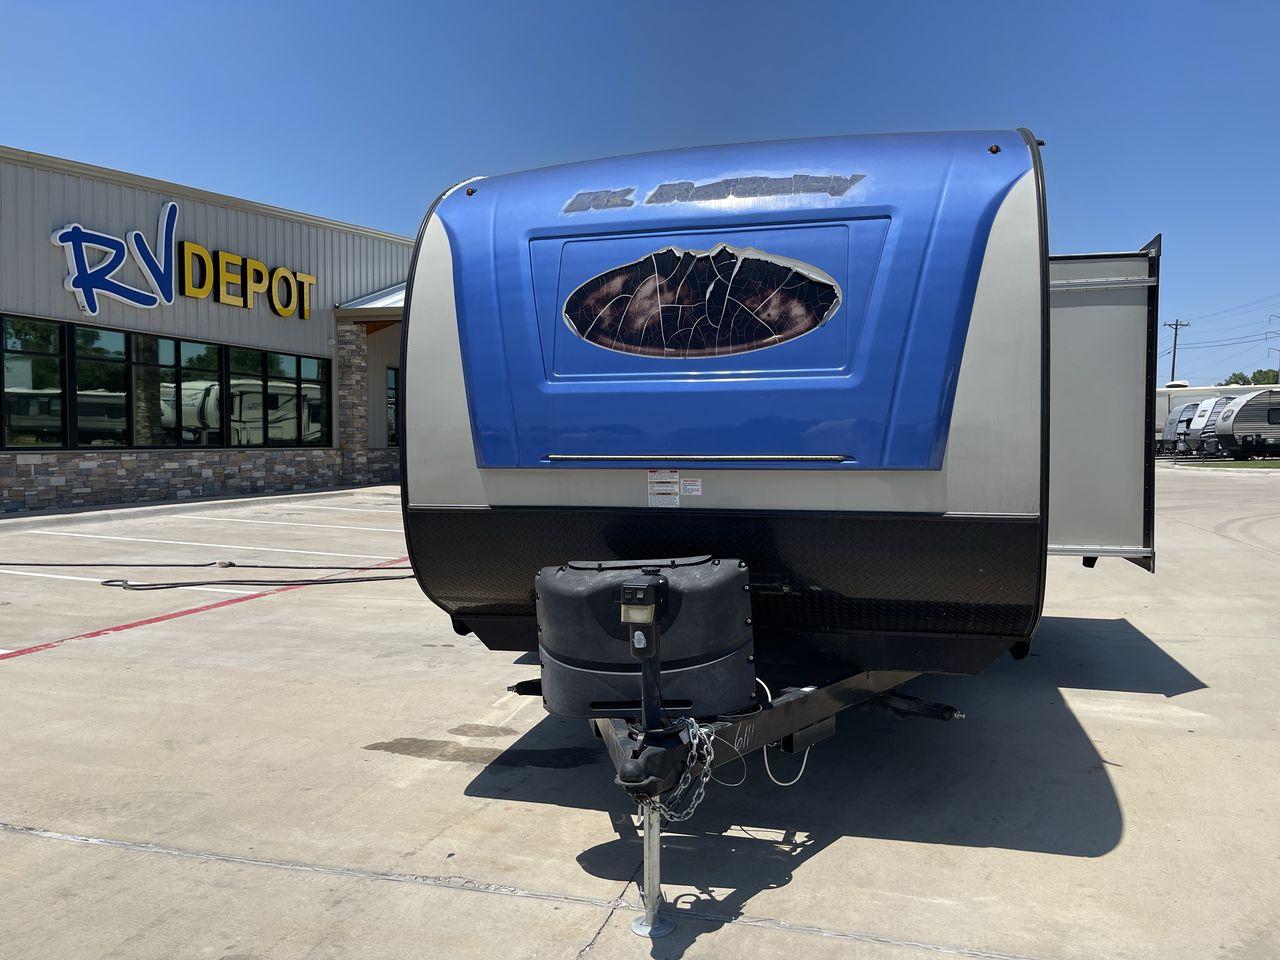 2018 TAN RVMT MT MCKINLEY 268RB (59CCC2829JL) , Length: 22 ft. | Dry Weight: 5320 lbs. | Slides: 1 transmission, located at 4319 N Main Street, Cleburne, TX, 76033, (817) 221-0660, 32.435829, -97.384178 - Take a trip in the 2018 RVMT MT McKinley 268RB travel trailer and experience the freedom of the open road. Your camping trip will be delightful and unforgettable thanks to the thoughtful design of this comfortable and practical trailer. This trailer measures 22.8 ft in length, 8 ft in width, and - Photo #0